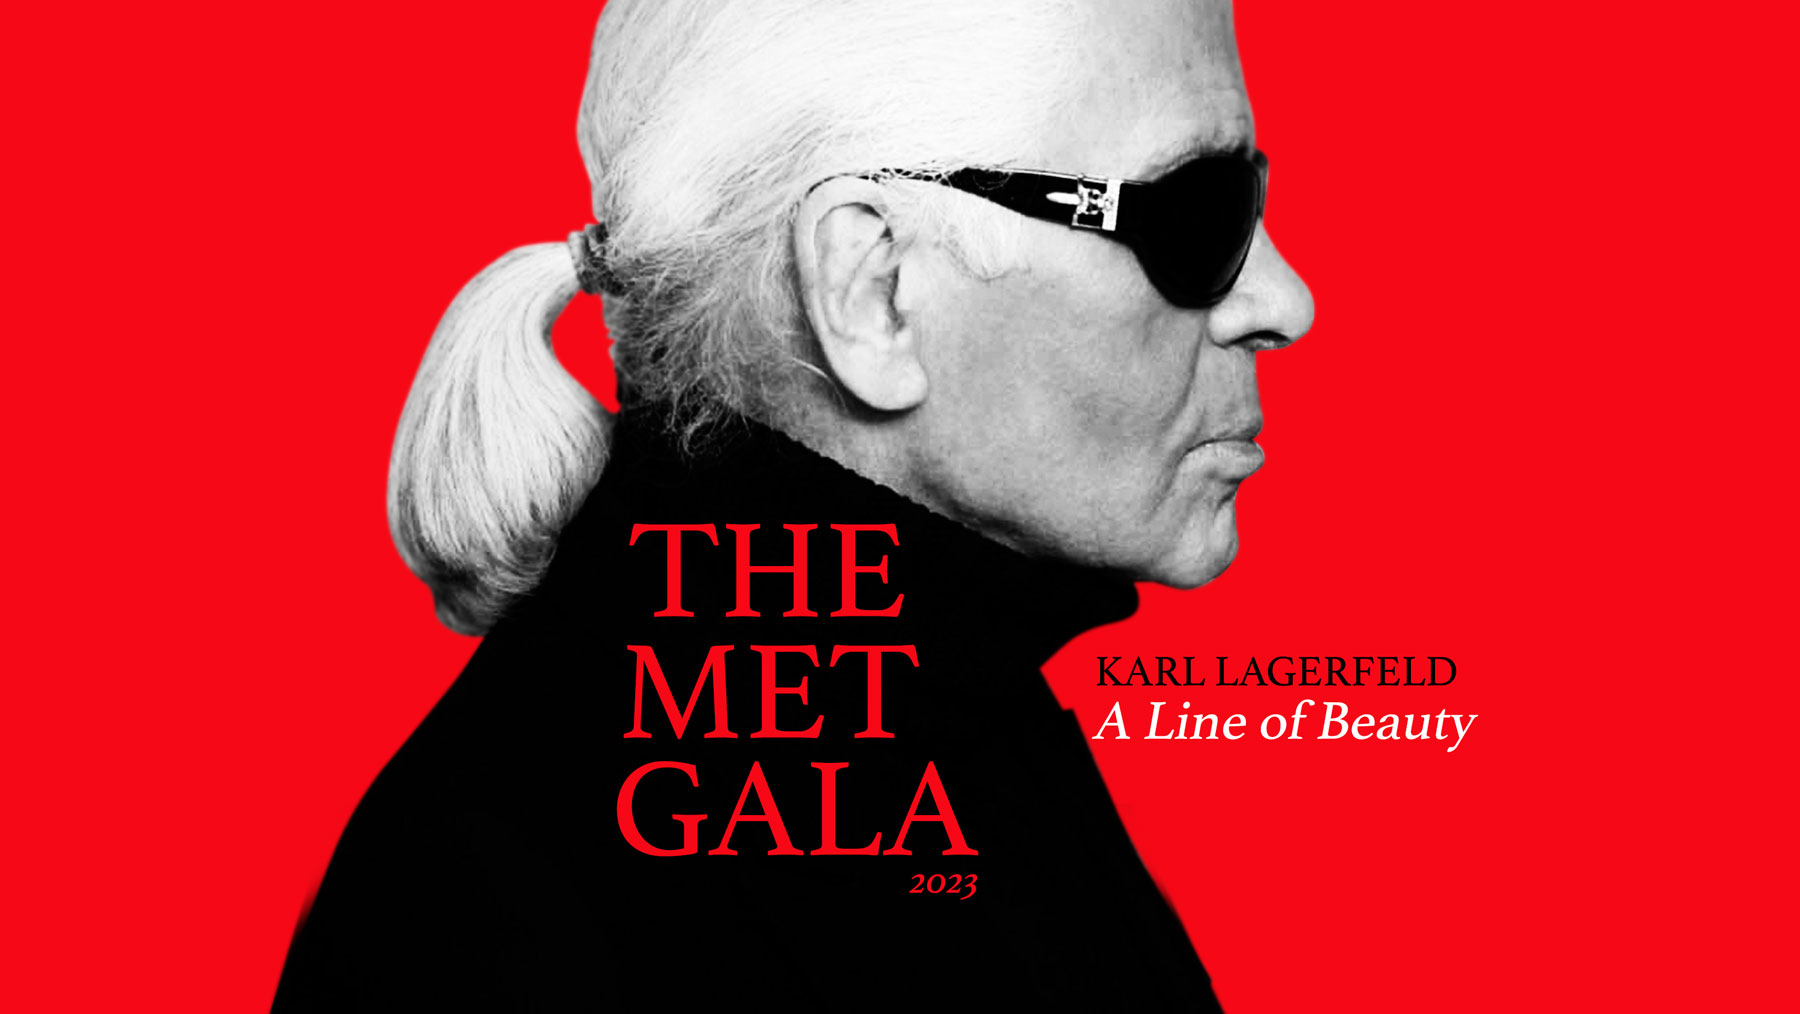 Met Gala 2023: Celebration and Tribute to Karl Lagerfeld